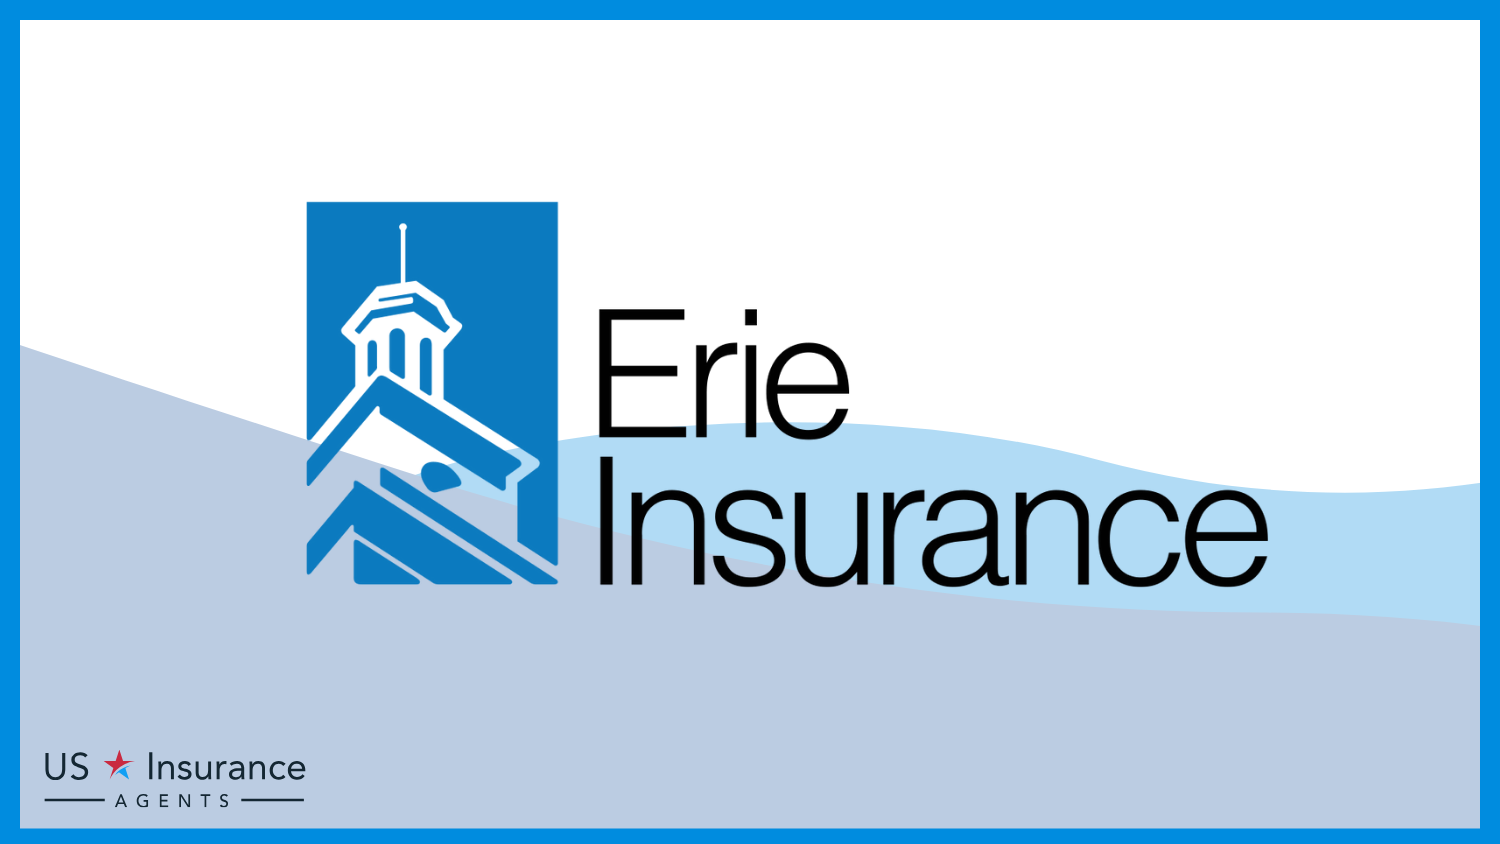 Erie: Best Business Insurance for Bloggers